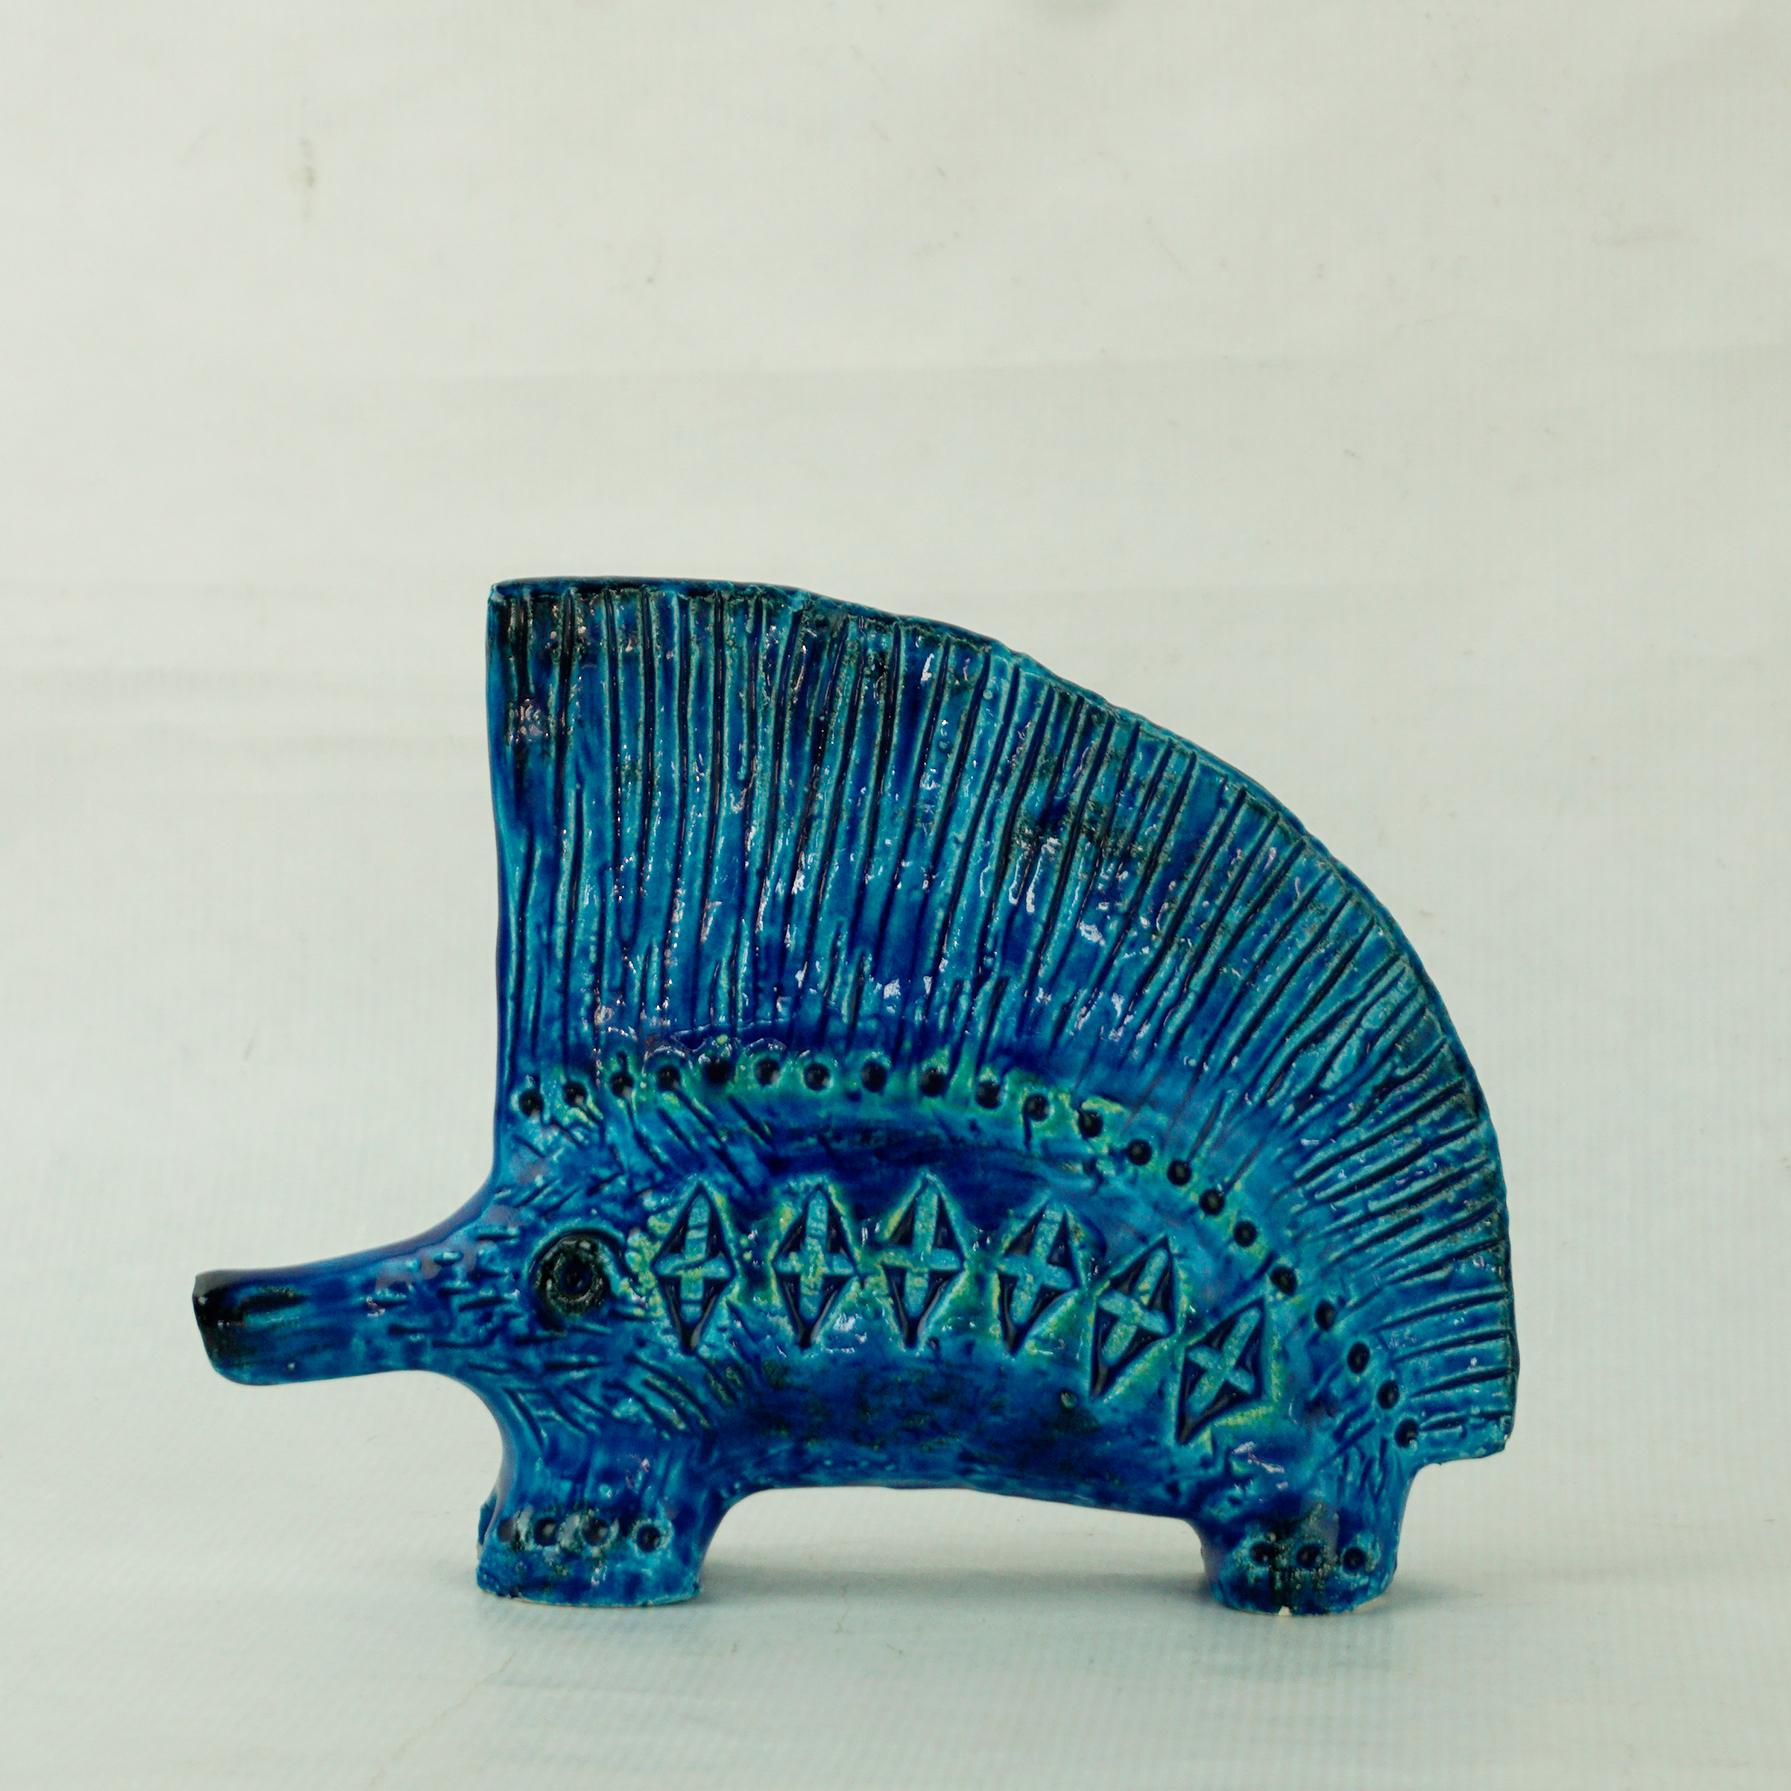 Charming iconic Italian modern ceramic porcupine or Istrice from the Rimini Blu series designed by Aldo Londi for Bitossi Italy.
The Italian Ceramic Artist Aldo Londi from Montelupo became Art Director of Bitossi in the early 1950s and created his